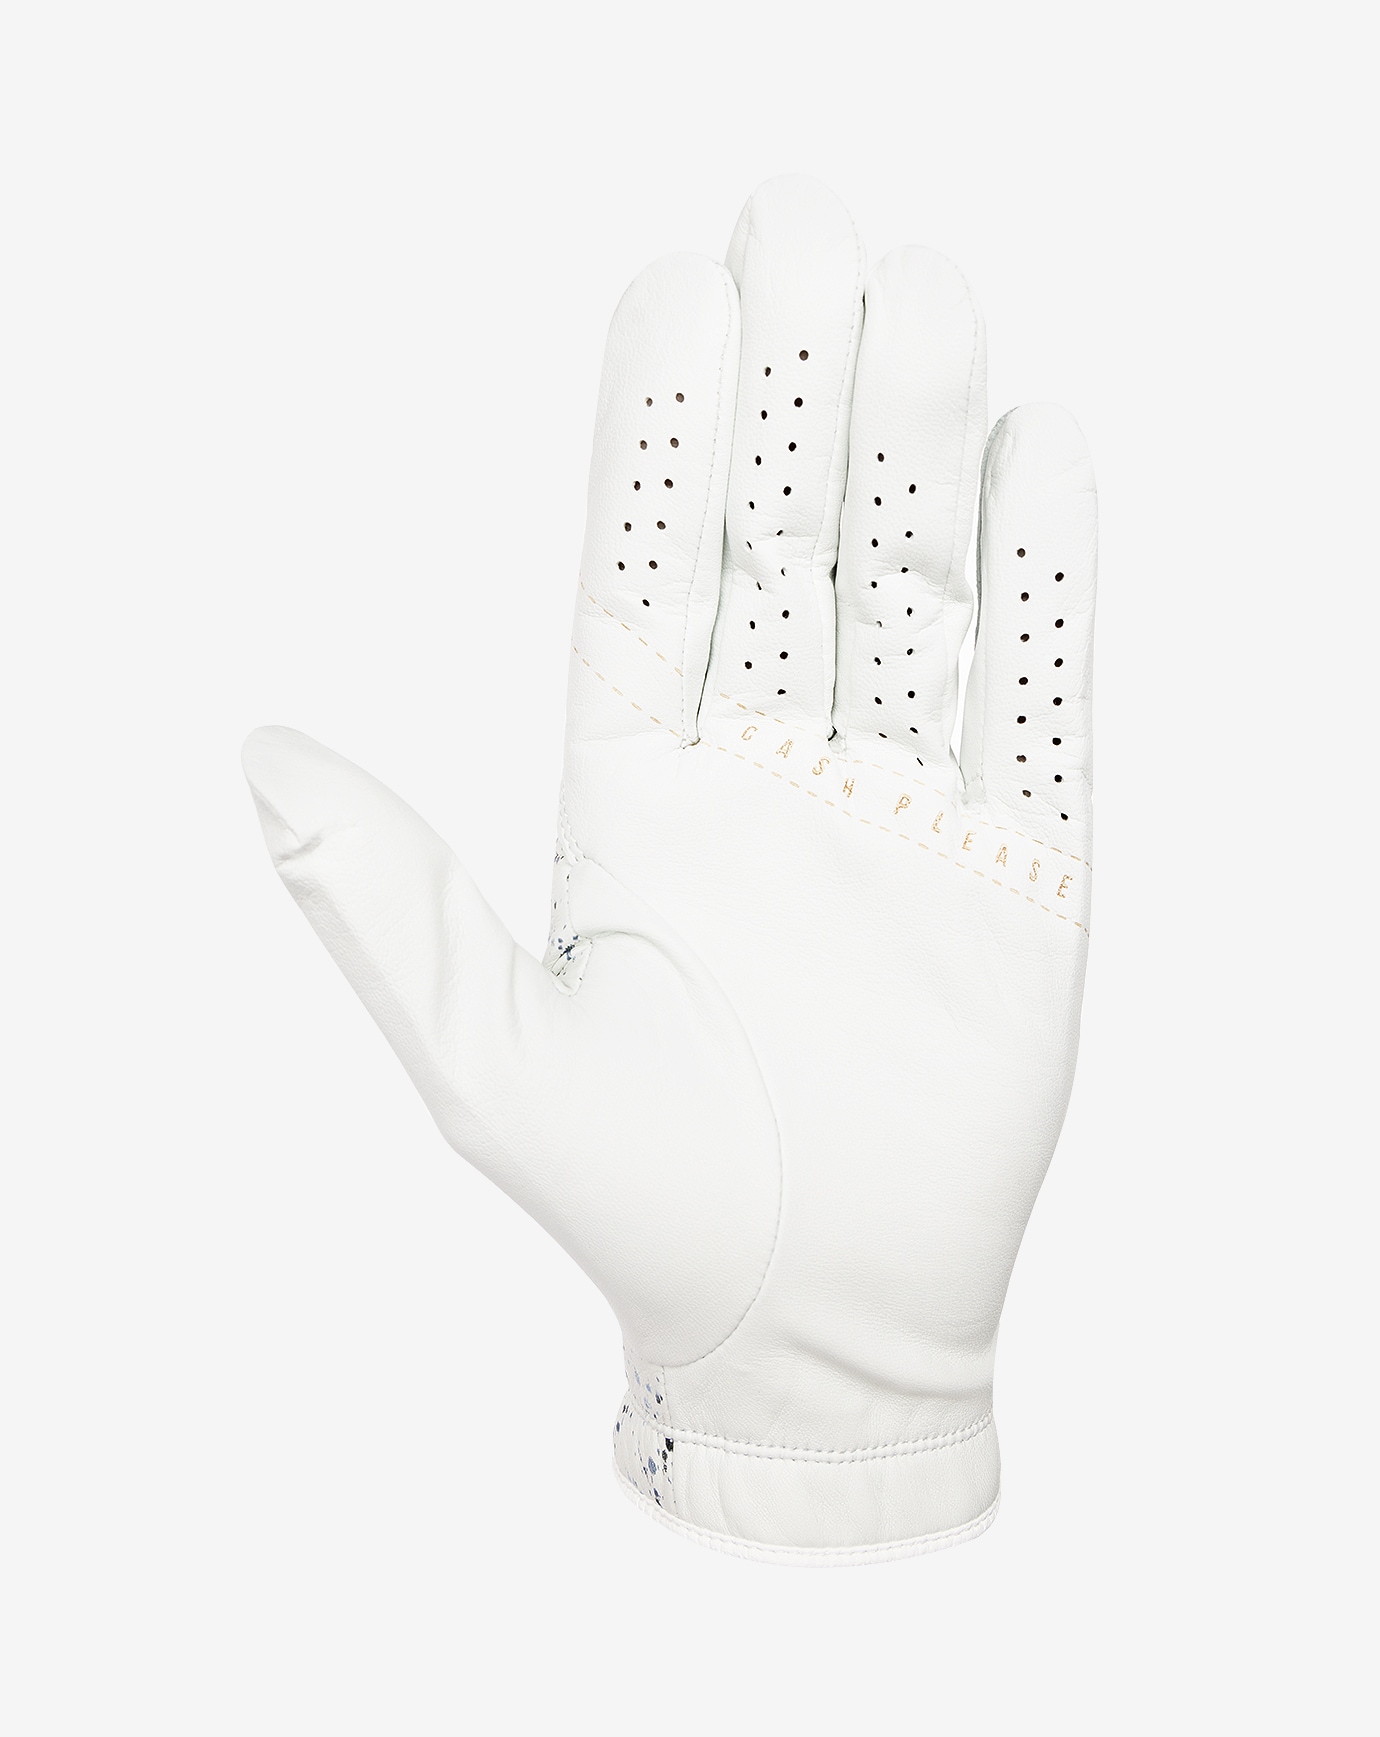 FRONT ROW SEAT GOLF GLOVE Image Thumbnail 2